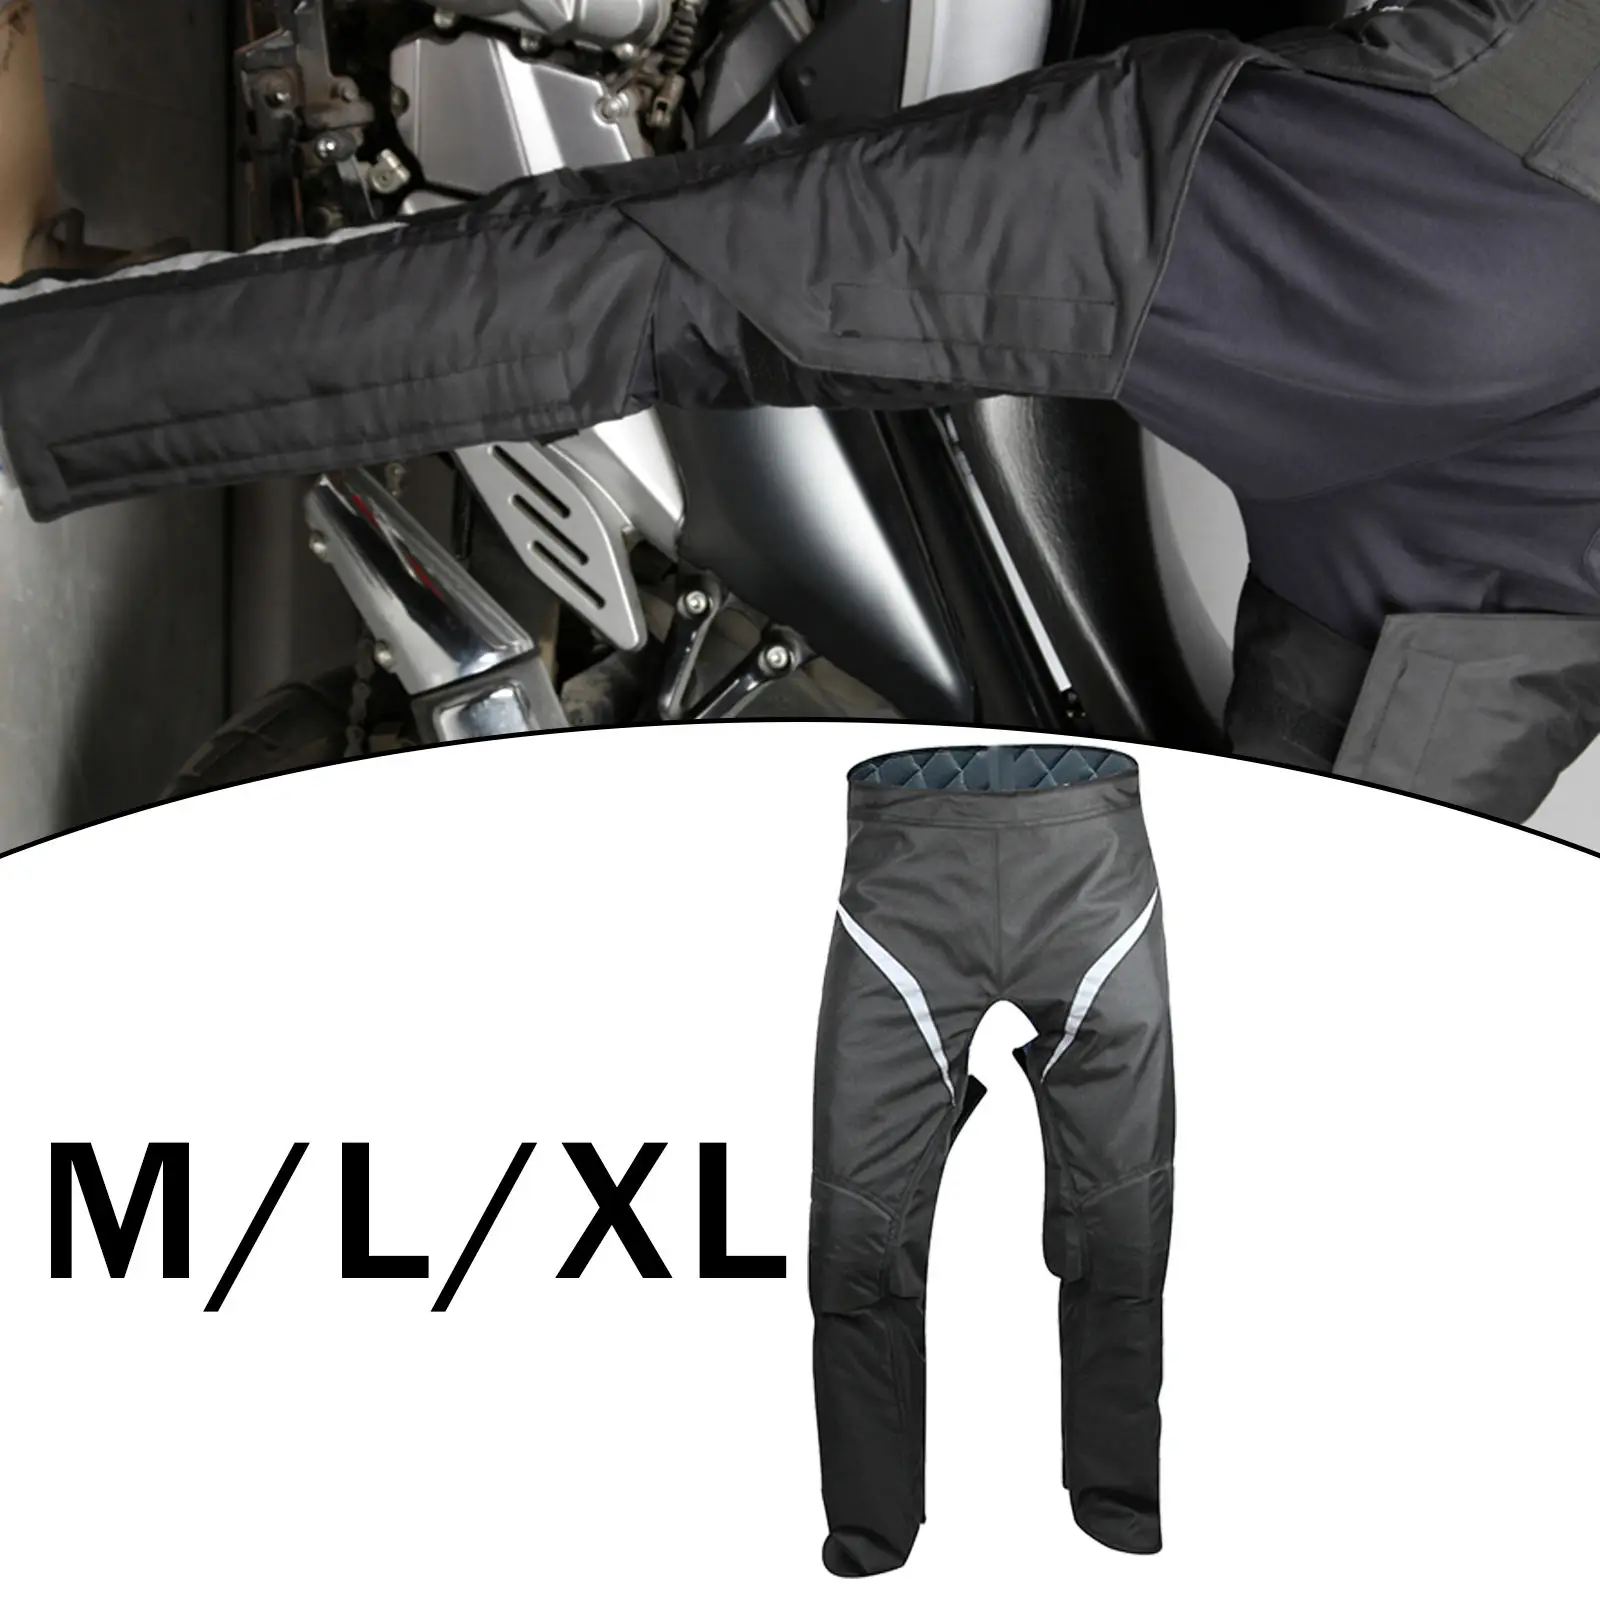 Motorcycle Pants Windproof Adjustable Warmth Leggings Offroad Overpants for Touring Skiing Hiking in Cold Seasons